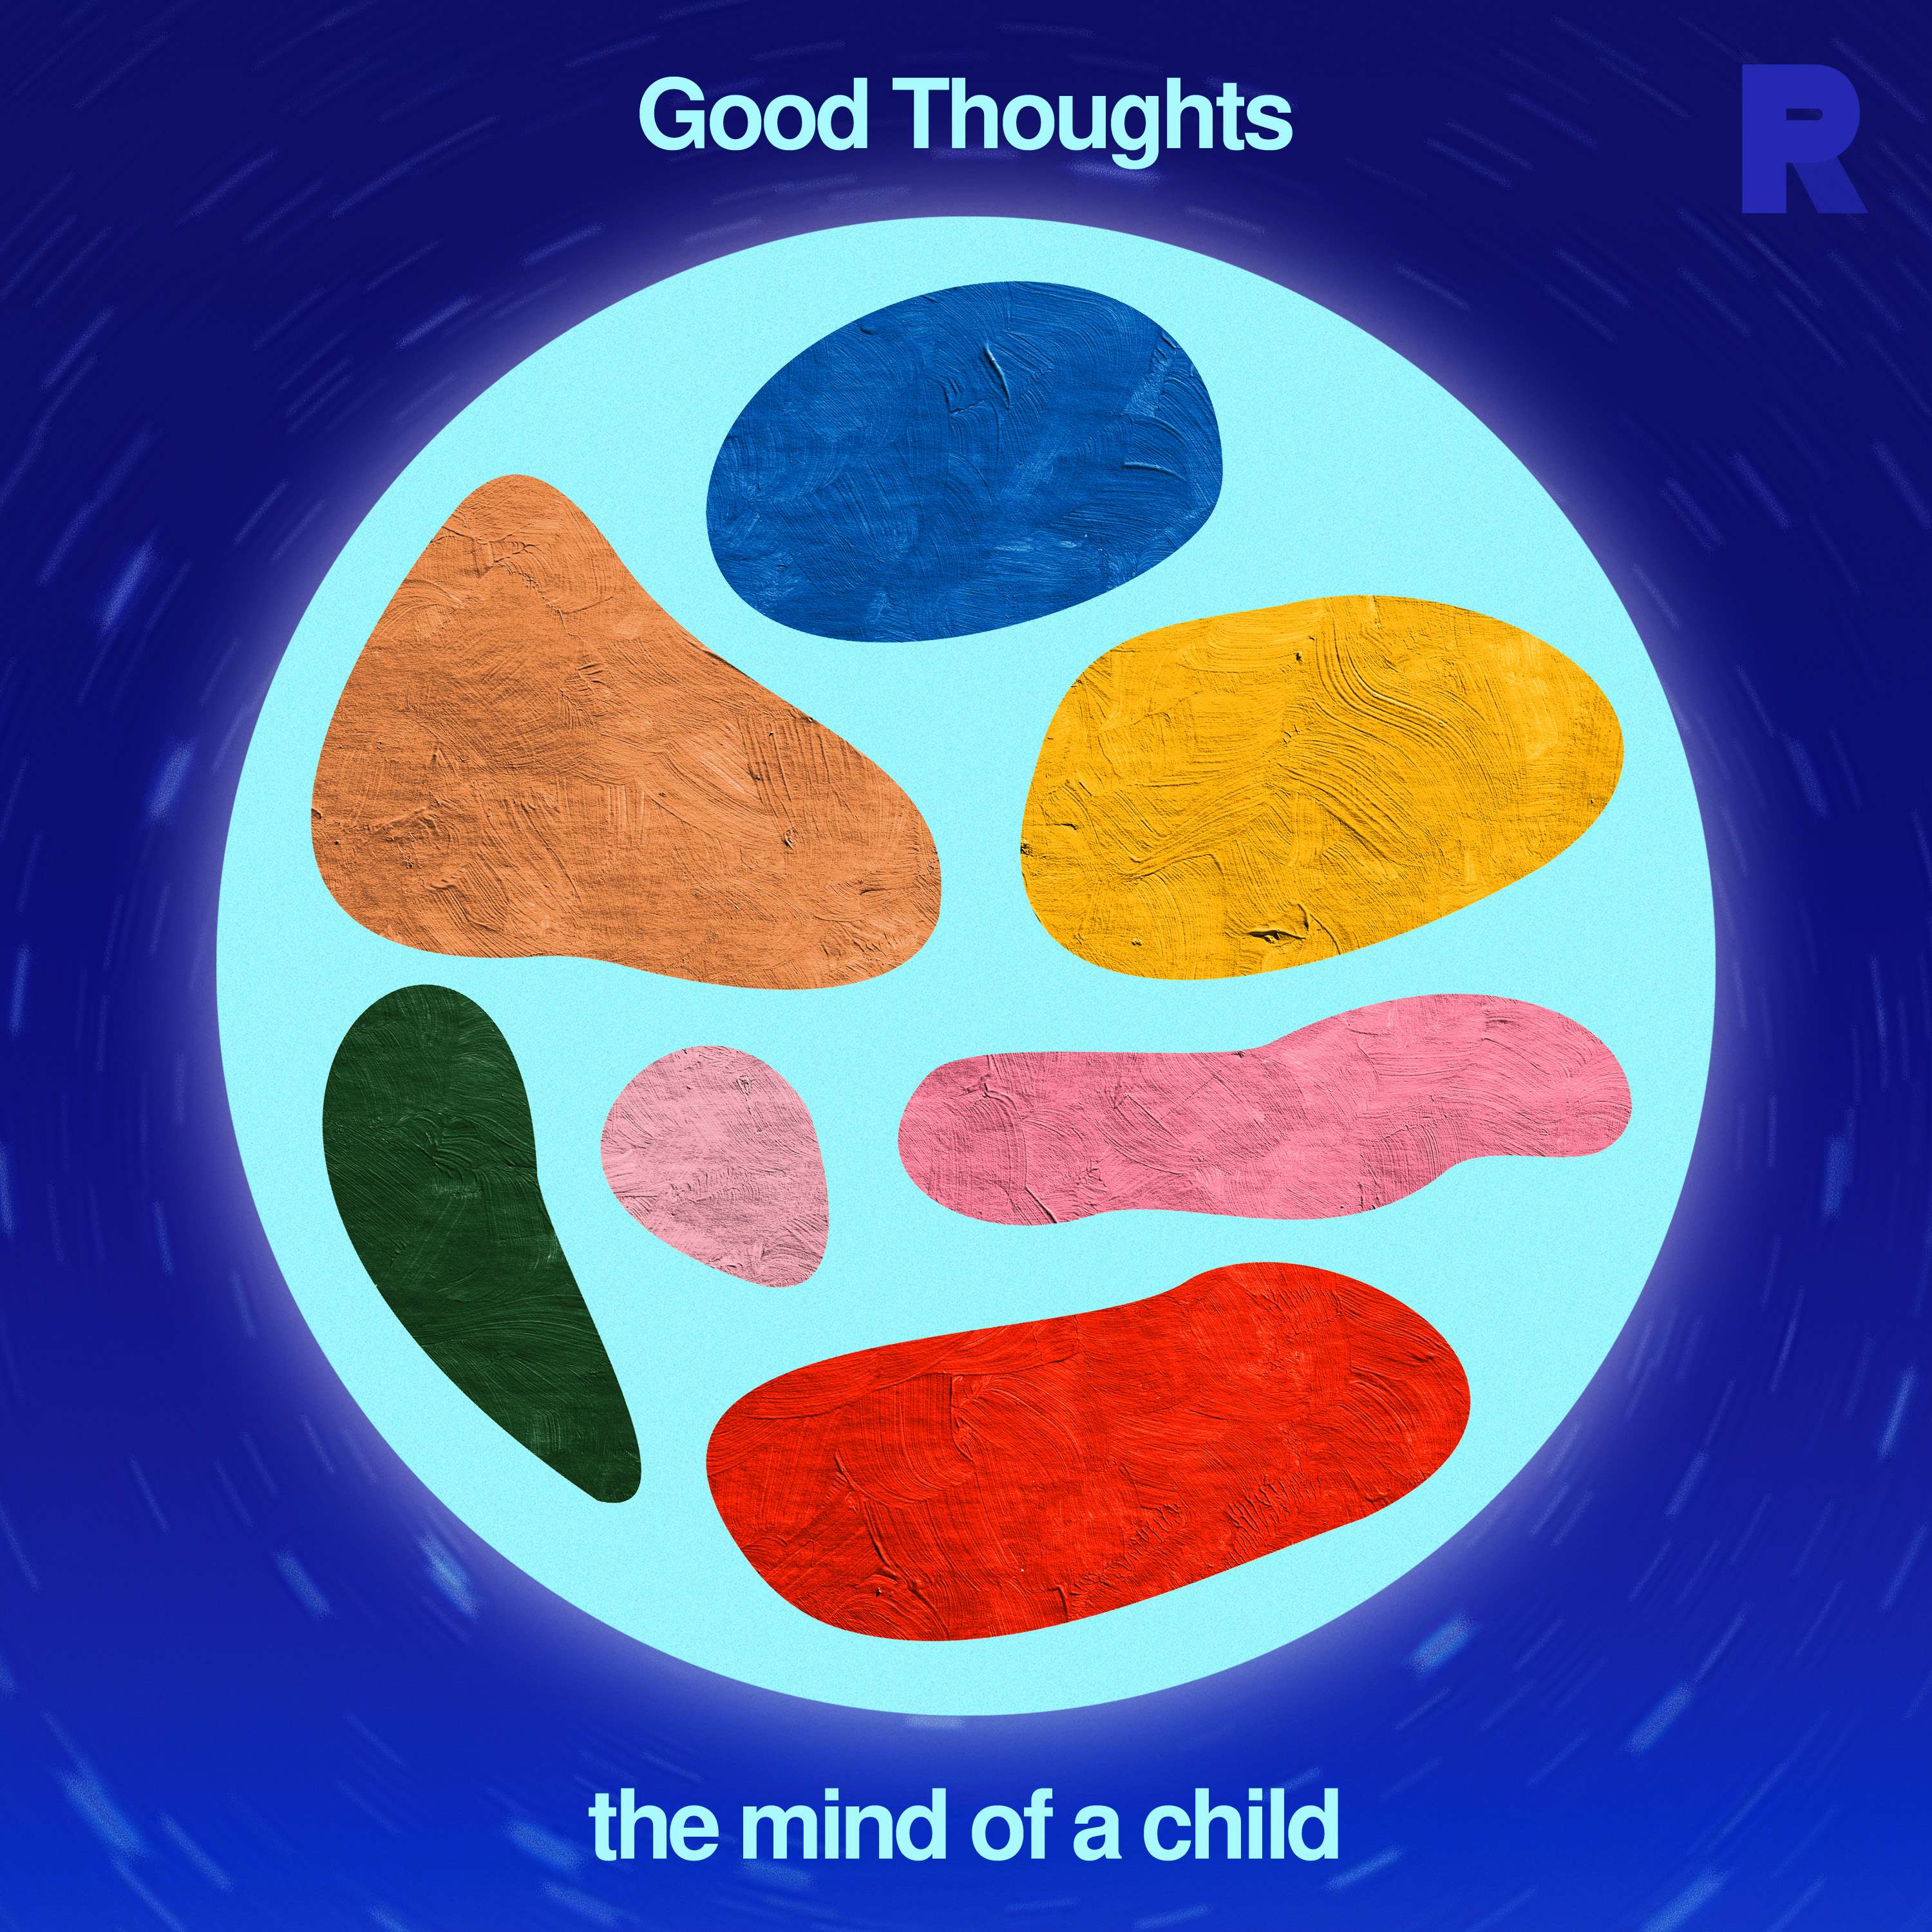 Good Thoughts from The Mind of a Child